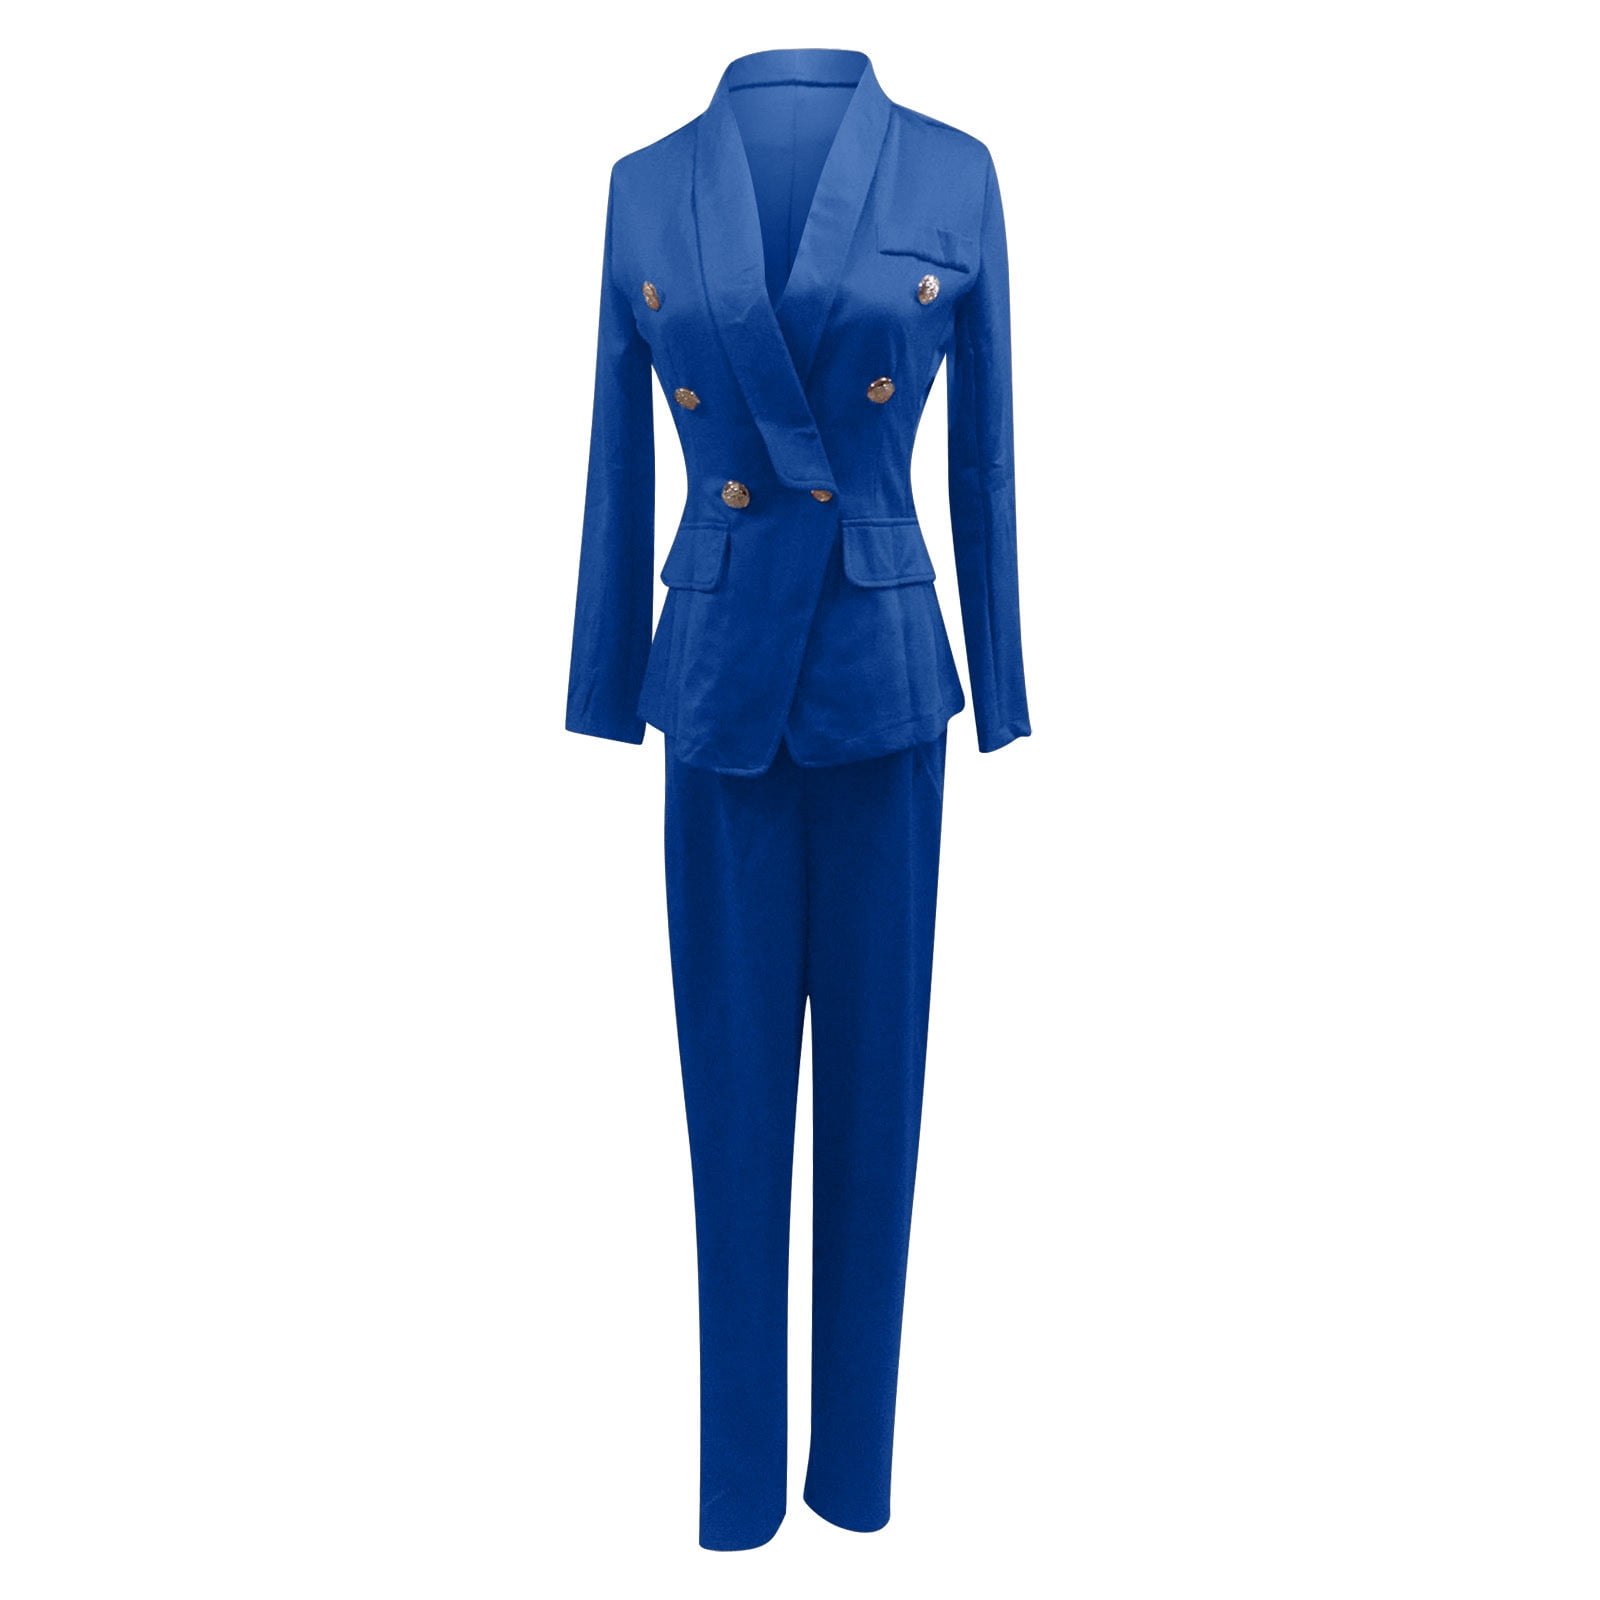 Women 's Business Blazer Pant Suit Set for Work Office Outfits